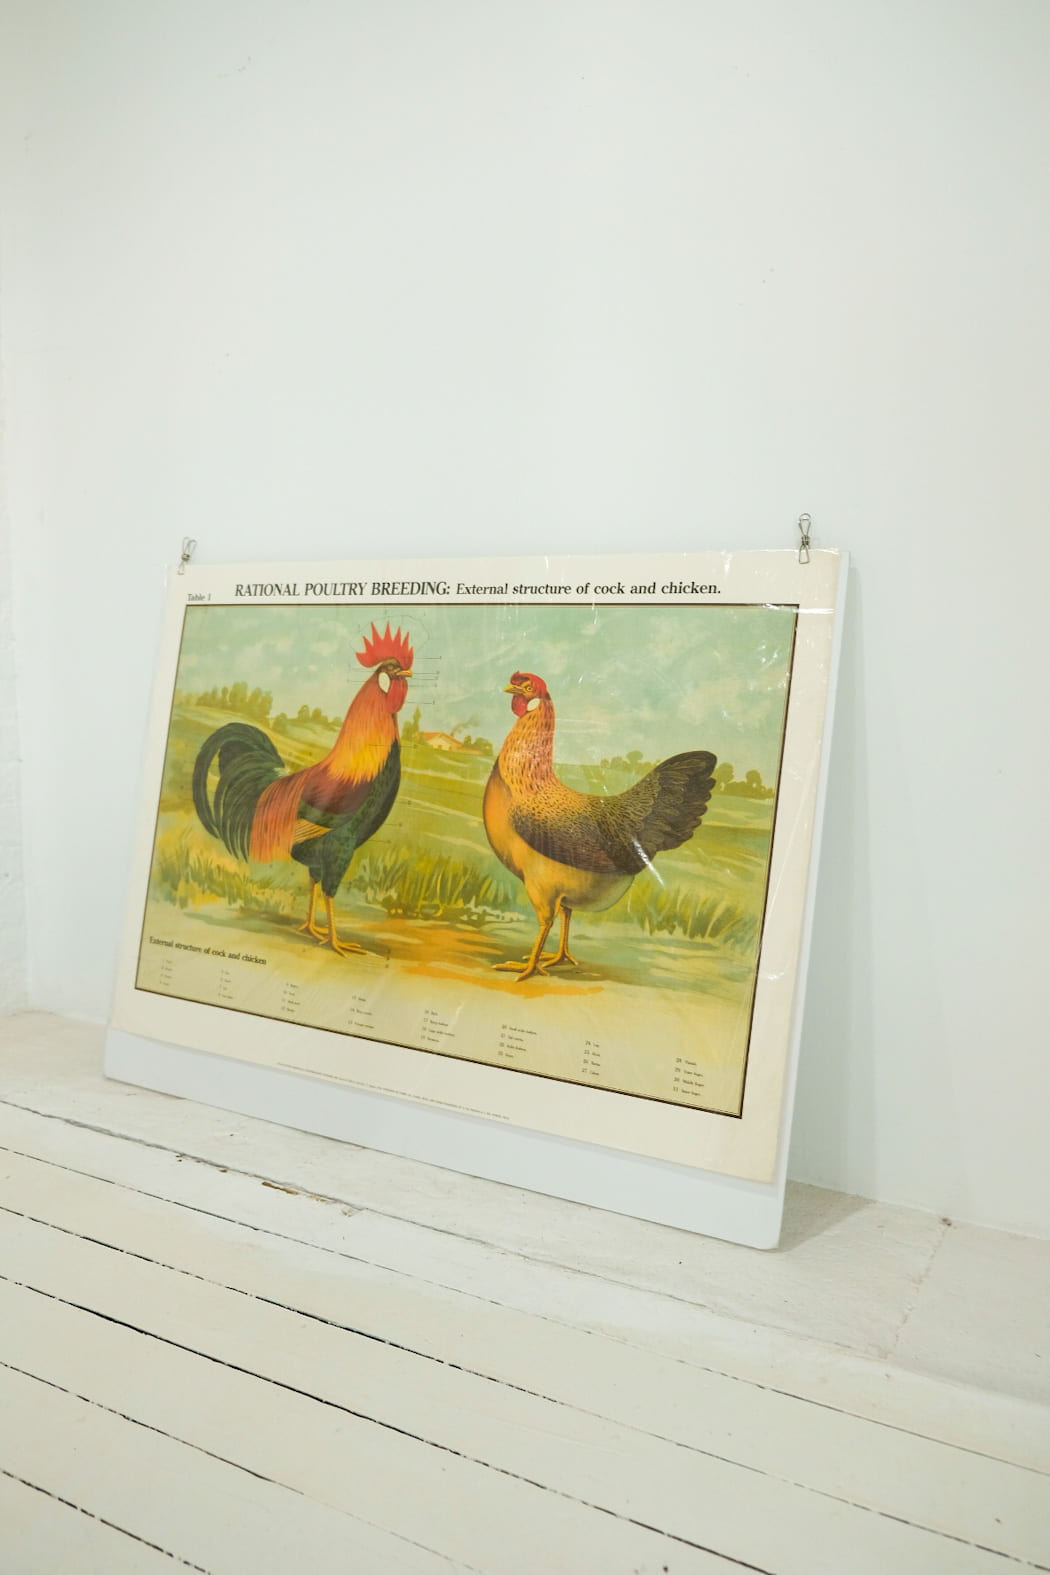 Rational Poultry Breeding Print